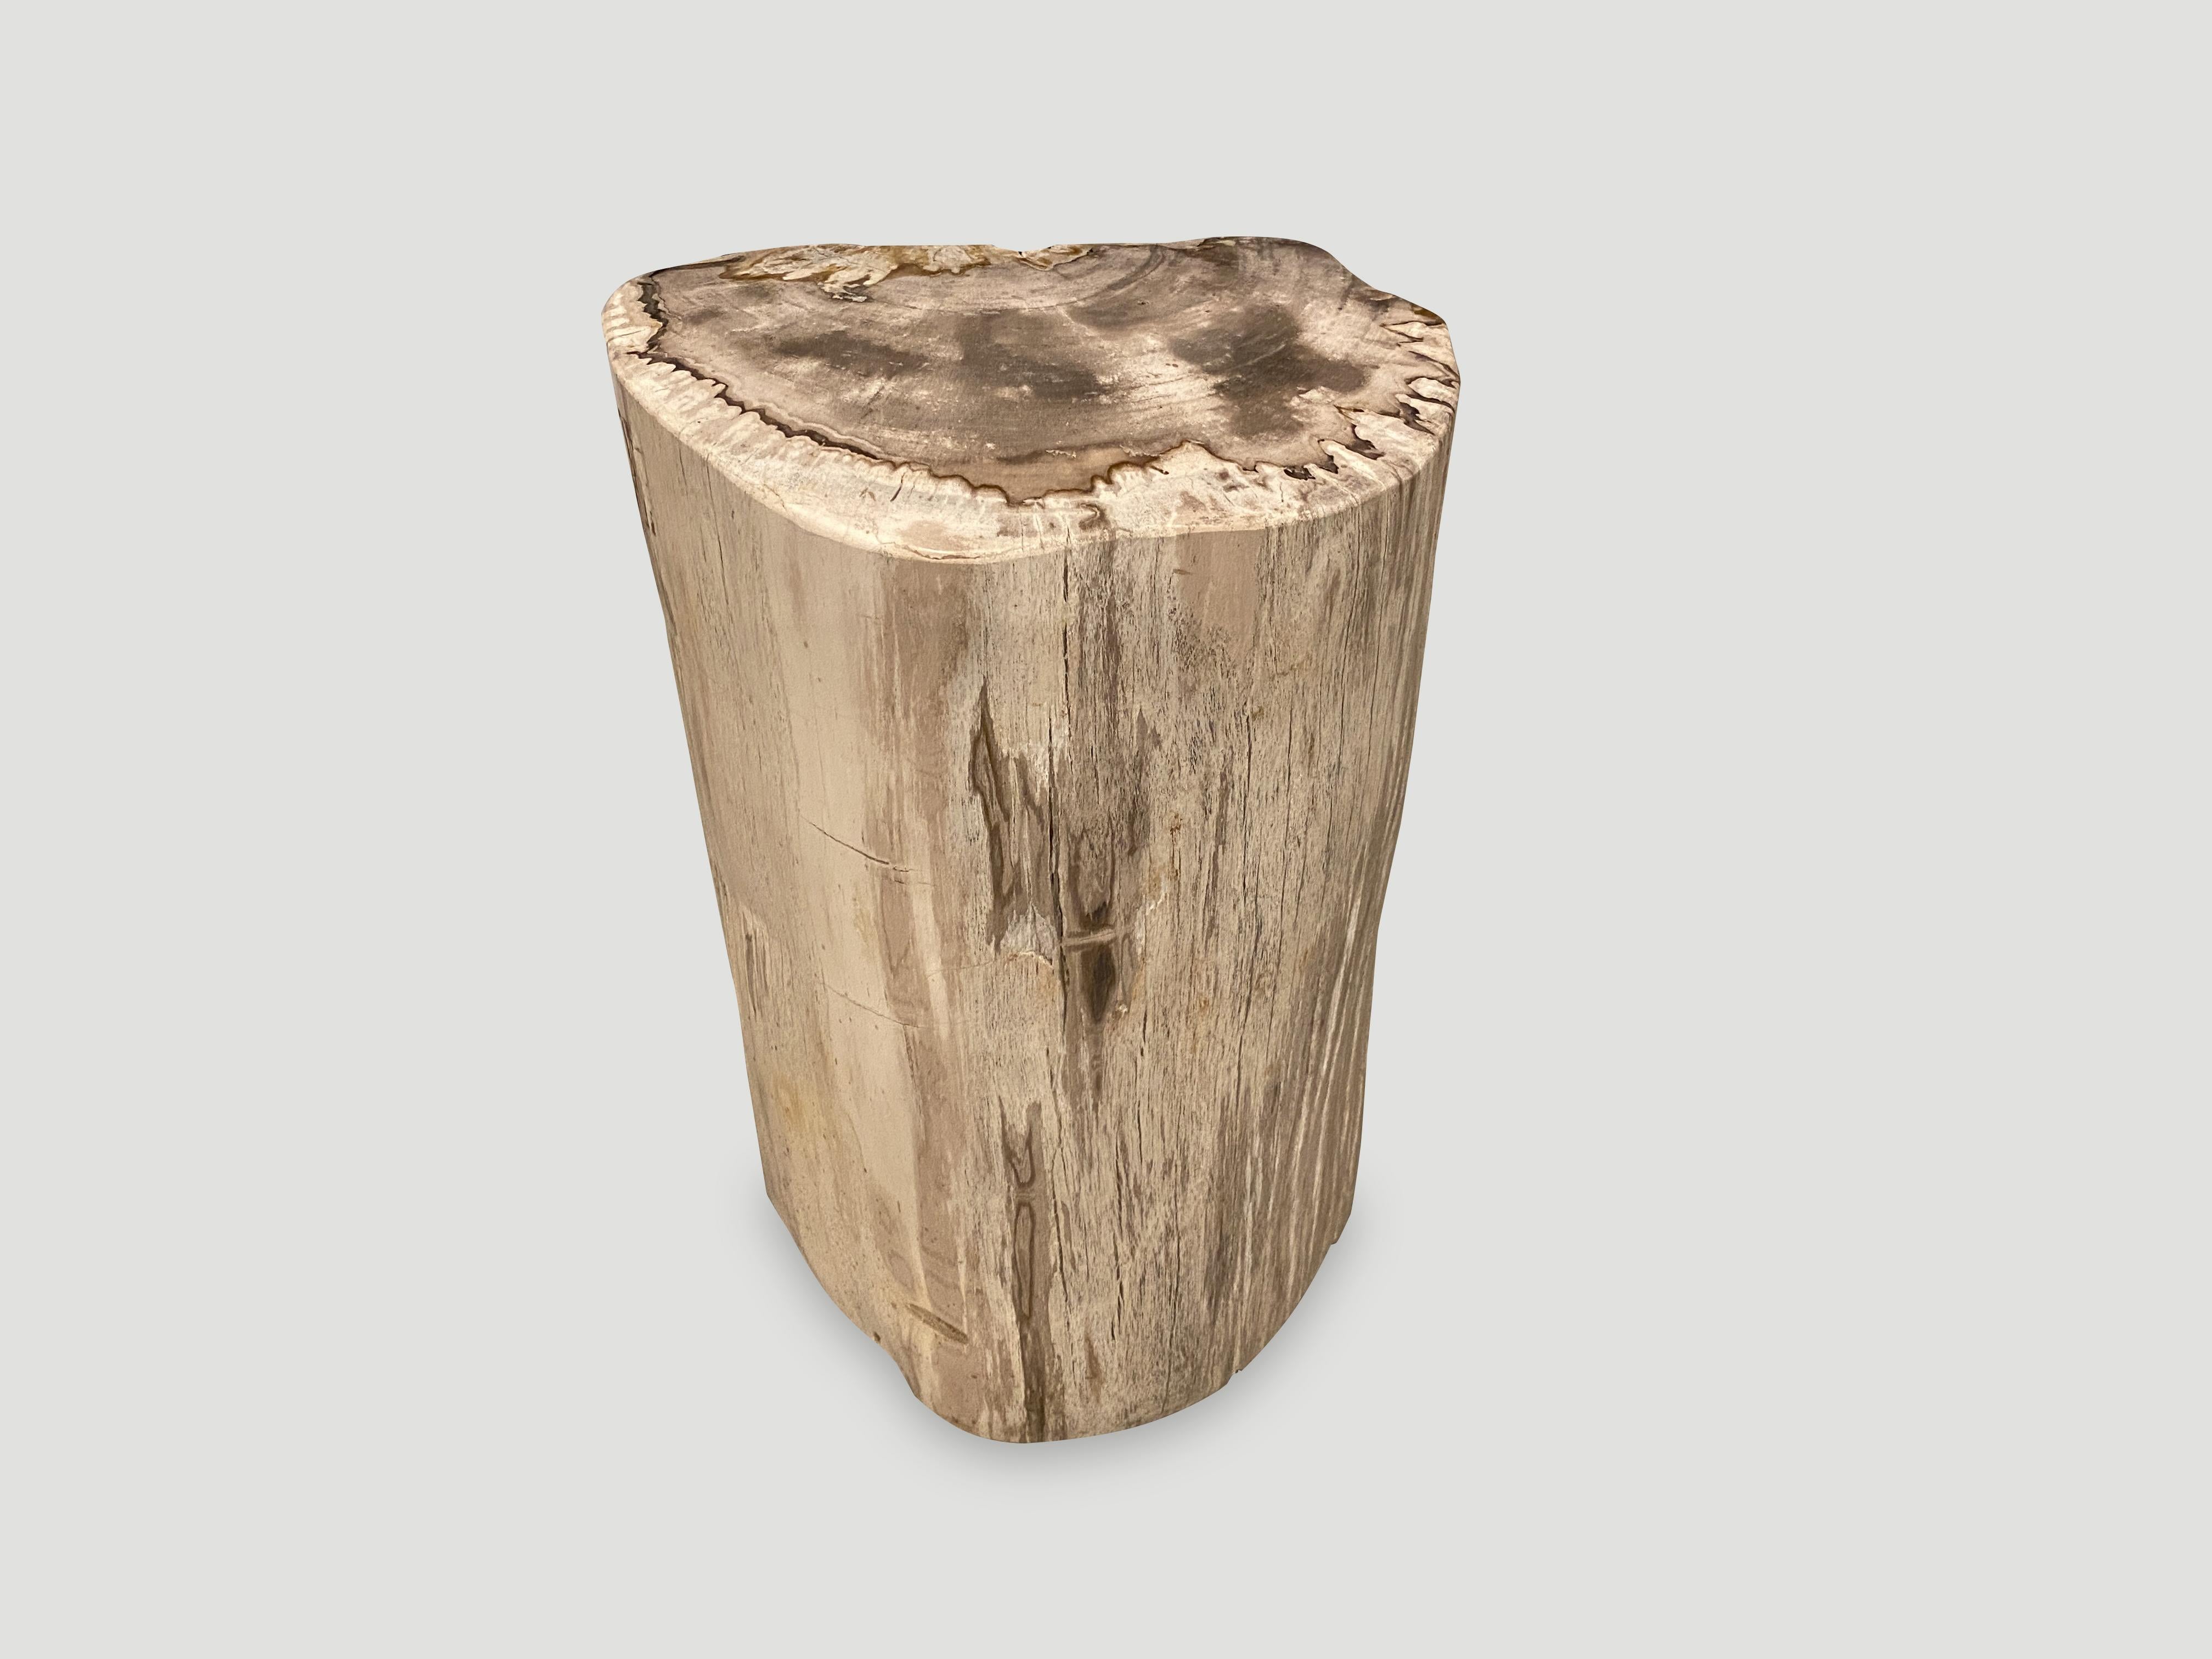 Beautiful neutral tones on this high quality petrified wood side table. It’s fascinating how Mother Nature produces these exquisite 40 million year old petrified teak logs with such contrasting colors and natural patterns throughout. Modern yet with